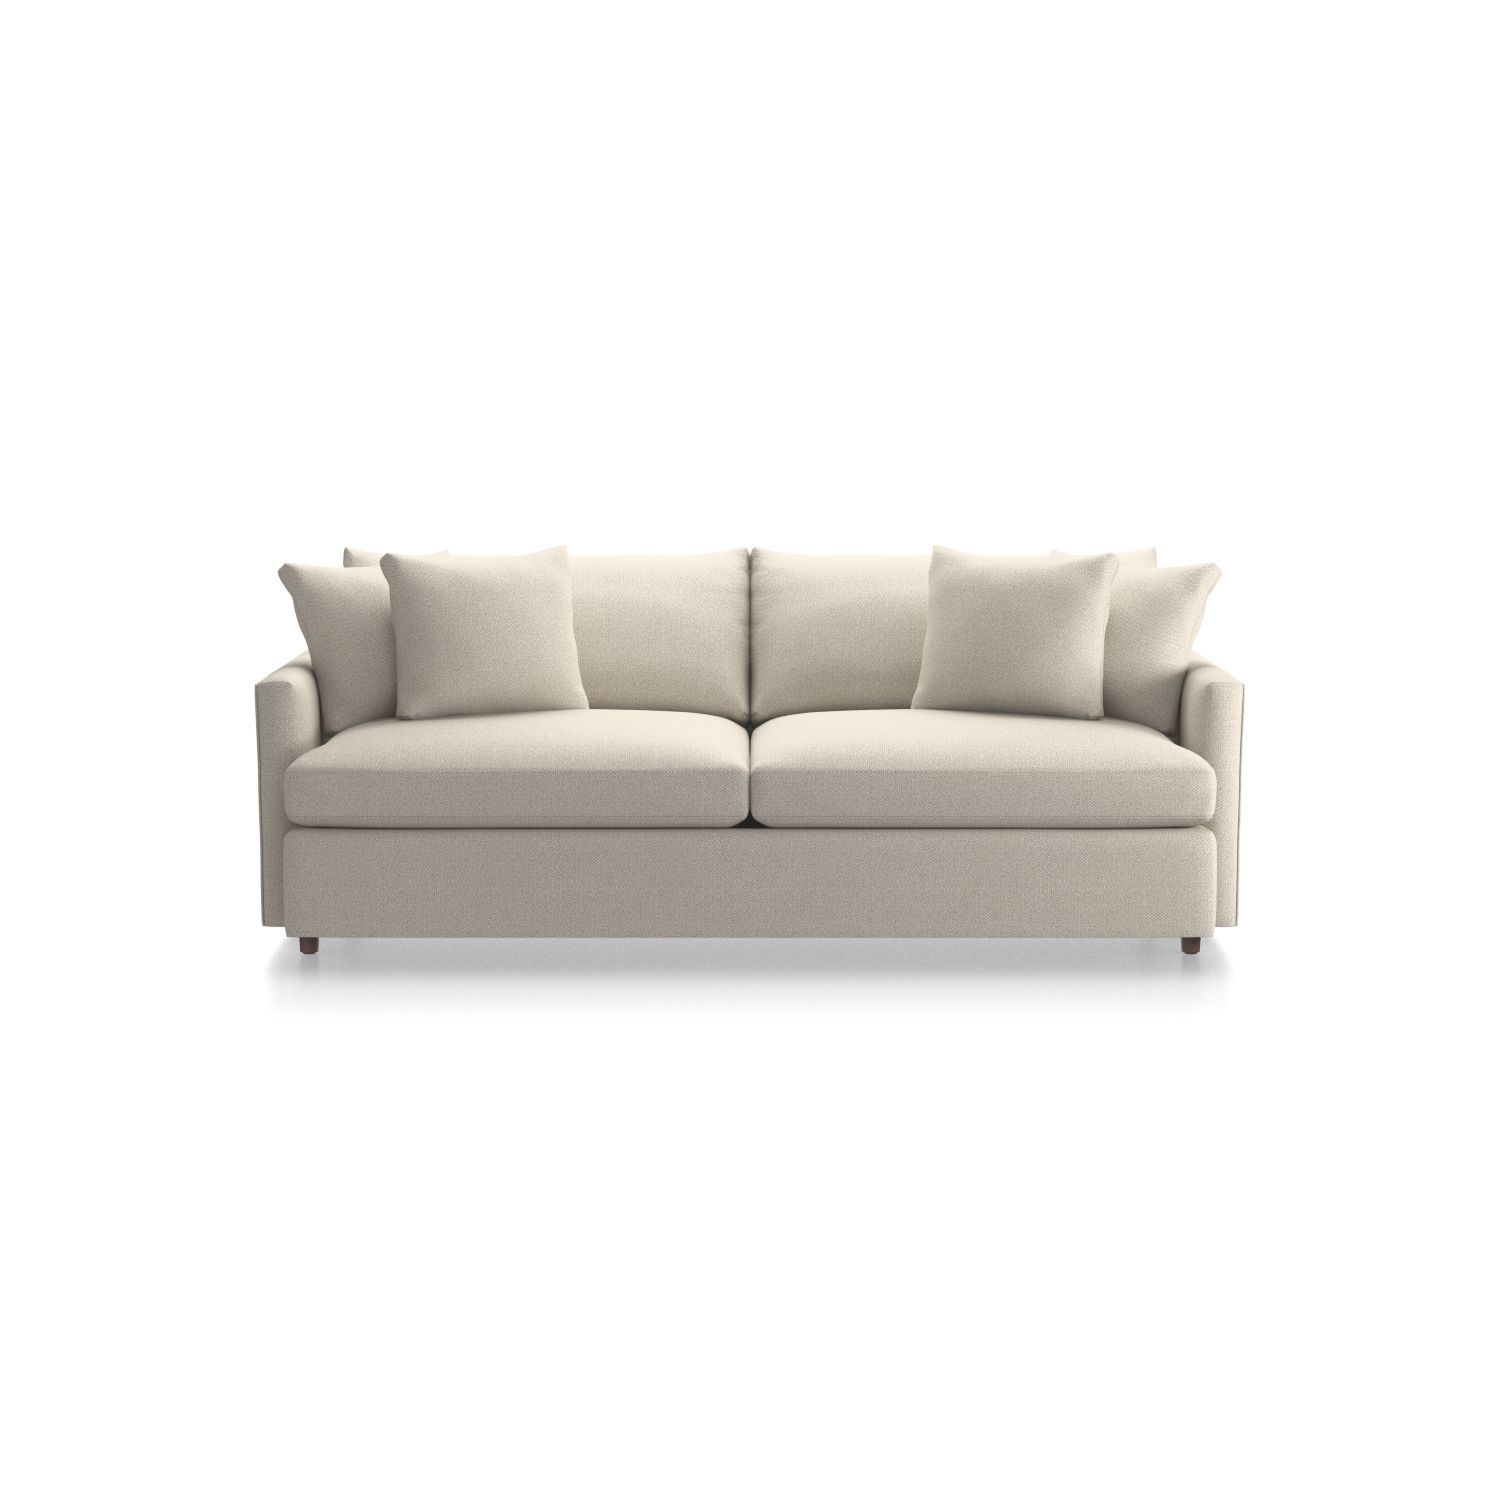 Lounge Ii 93" Sofa + Reviews | Crate And Barrel Inside Elm Grande Ii 2 Piece Sectionals (View 21 of 25)